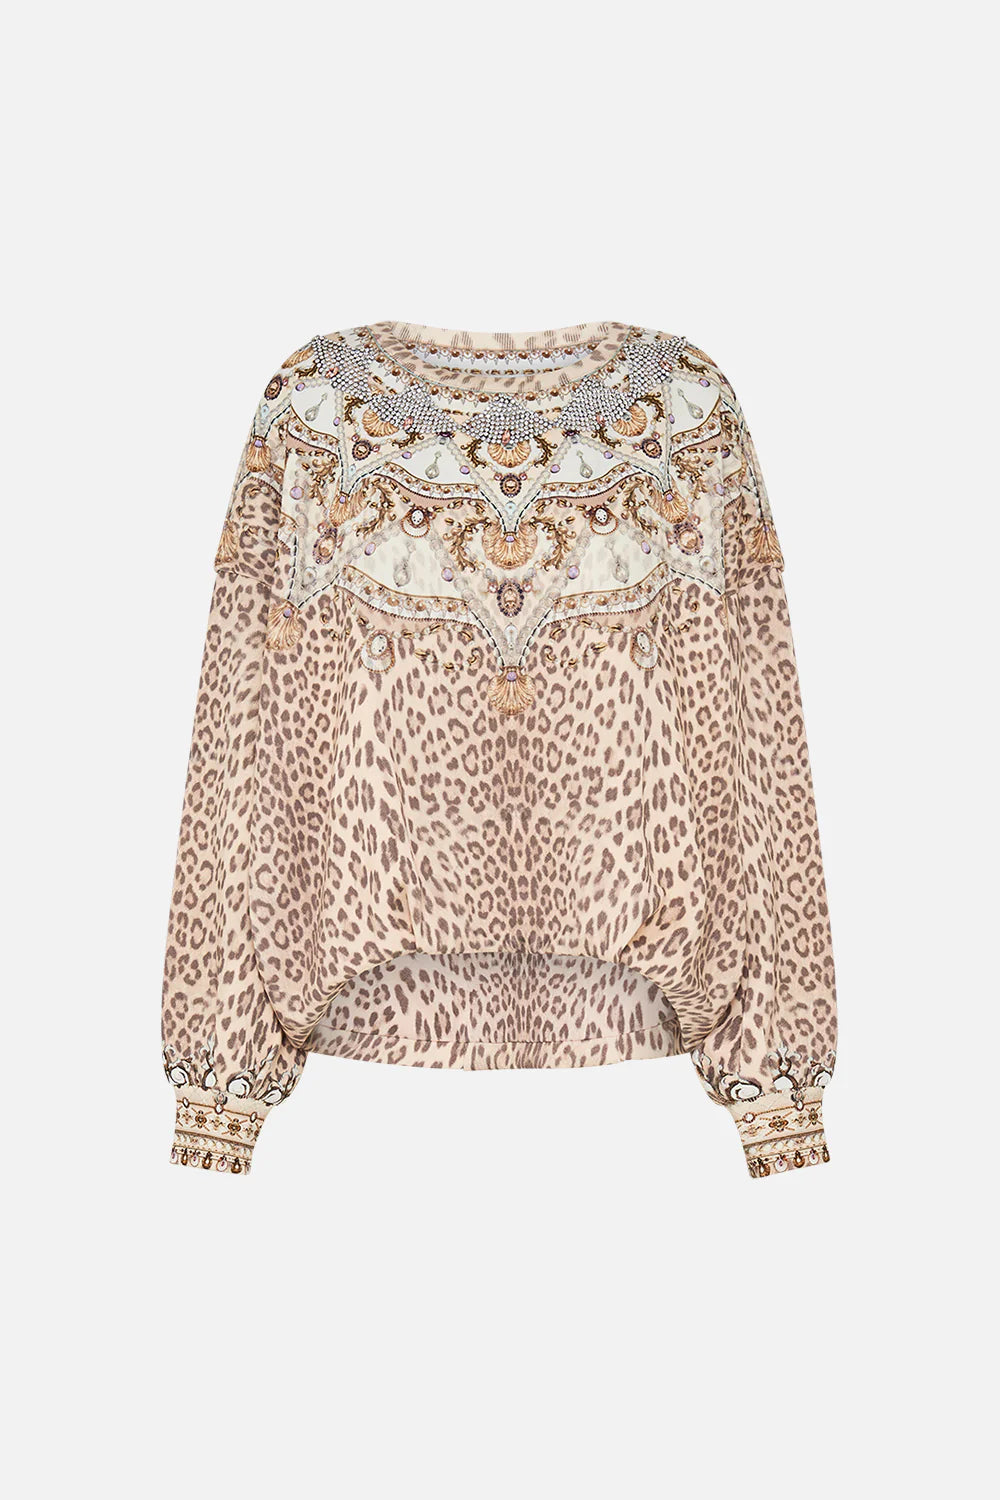 Embellished tuck detail sweater, grotto goddess